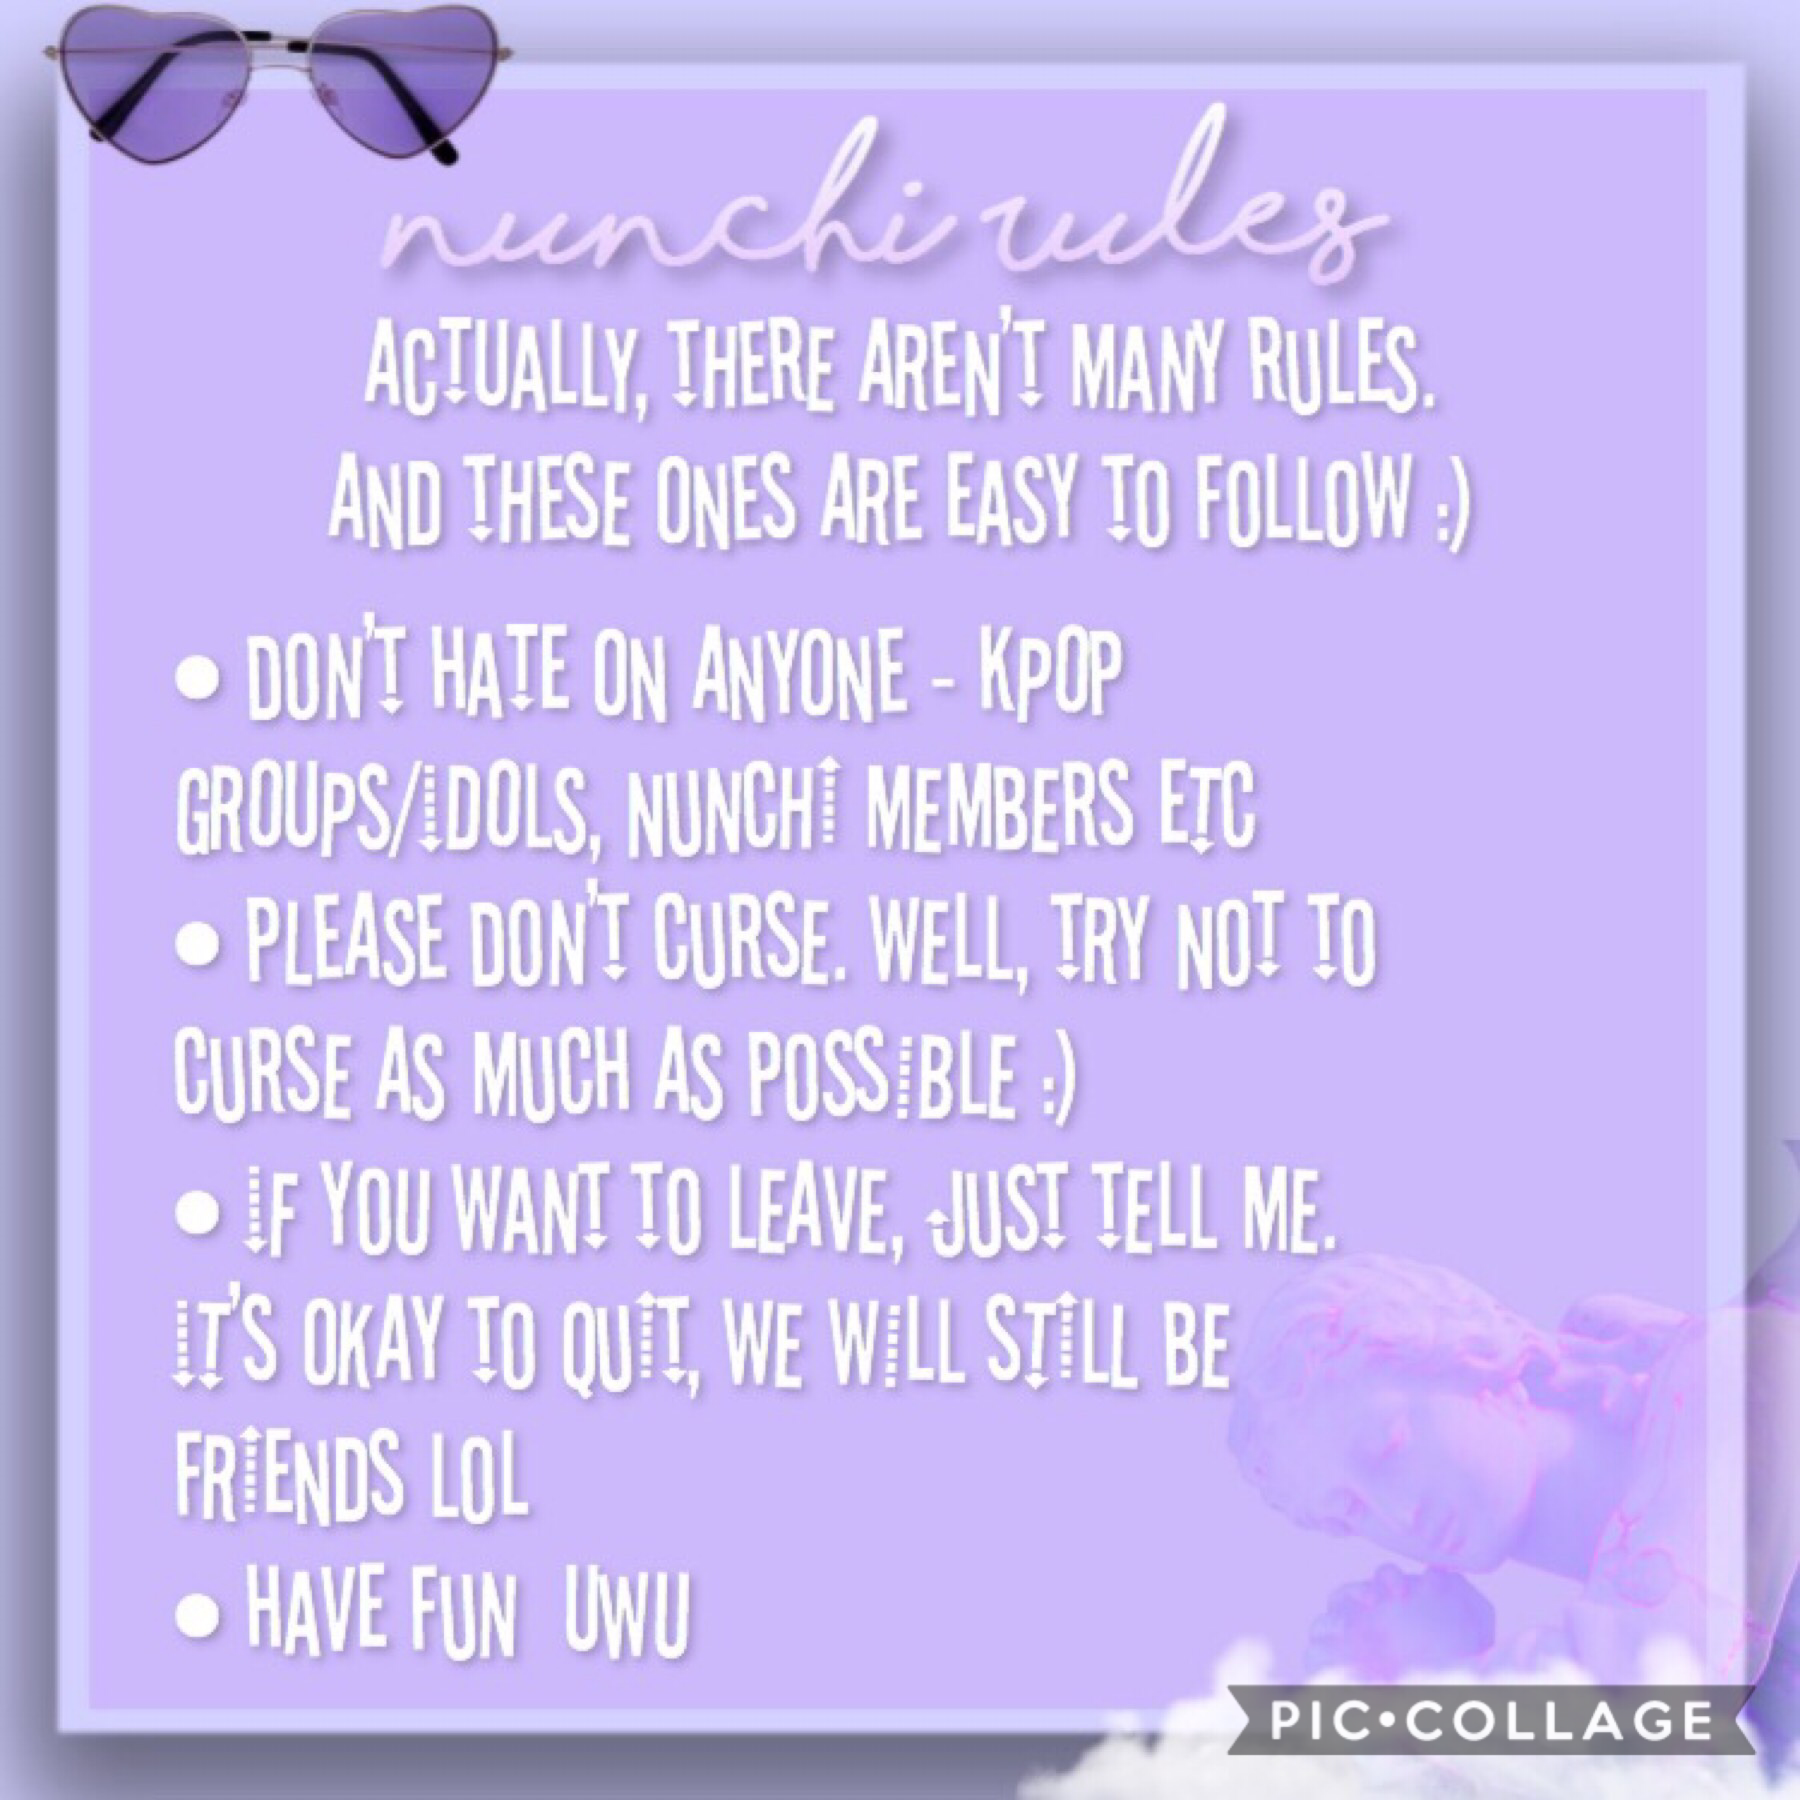 just a few rules so we can have fun without hurting anyone💜 - hannah🔮